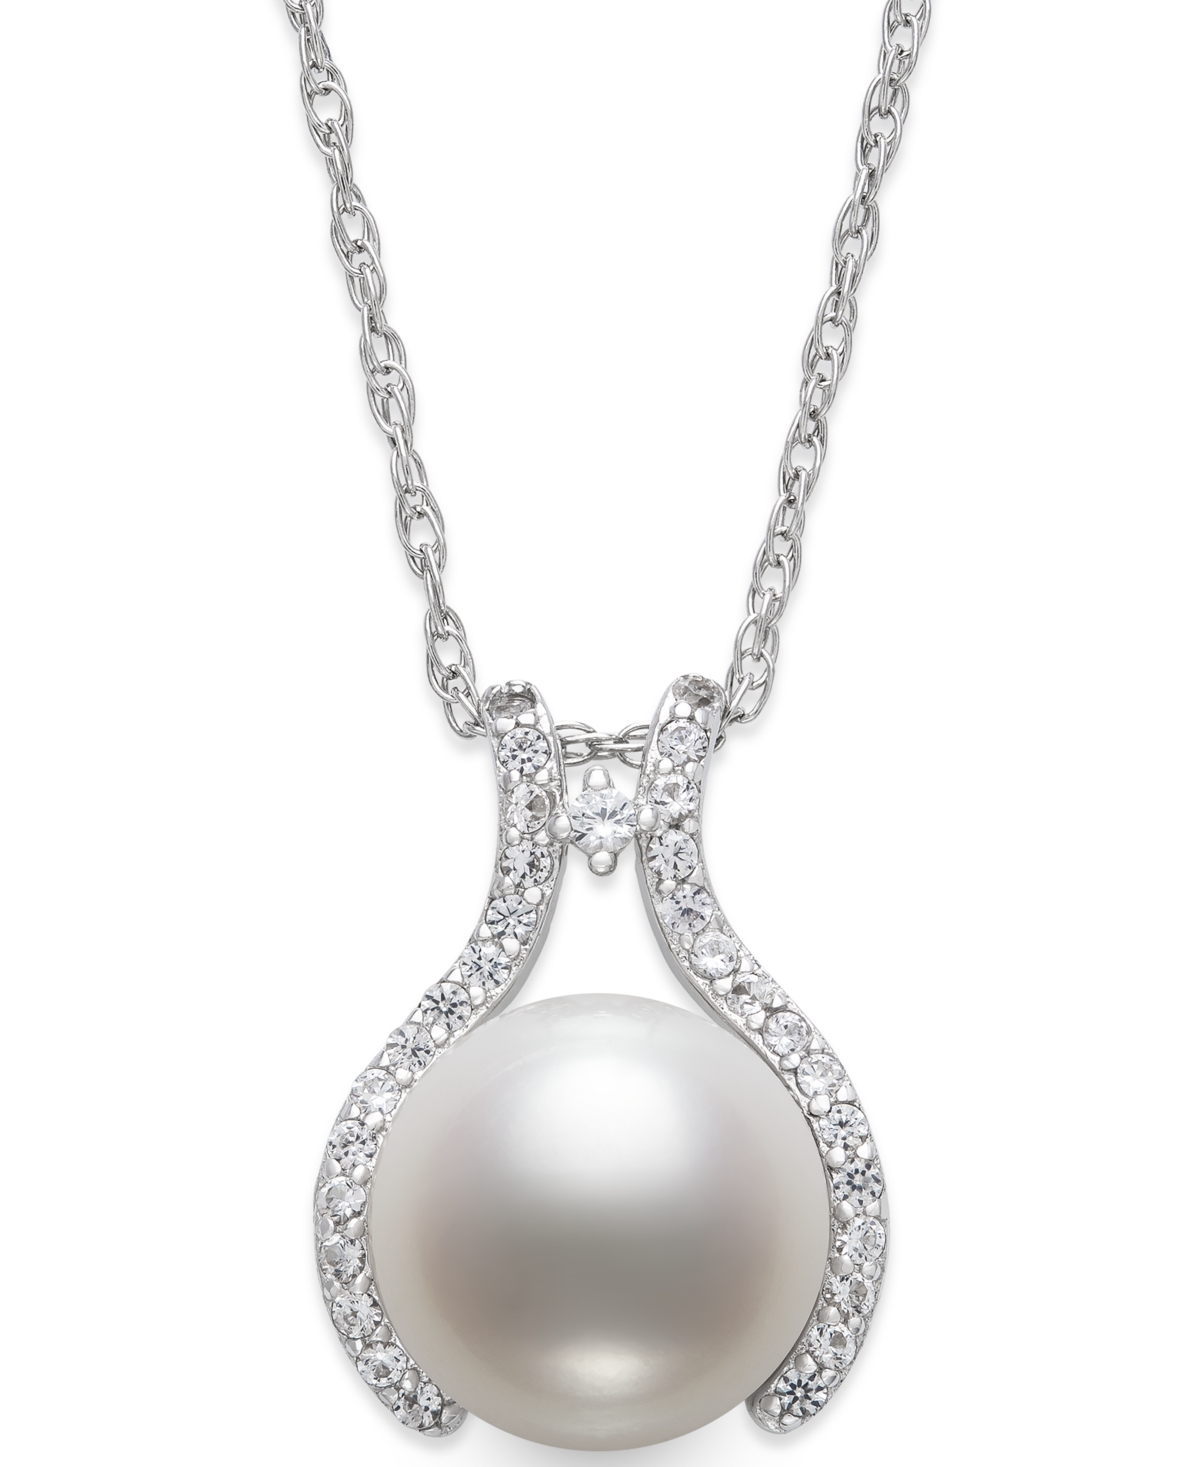 Belle de Mer Cultured Freshwater Pearl (9mm) & Cubic Zirconia Wishbone 18" Pendant Necklace in Sterling Silver, Created for Macy's